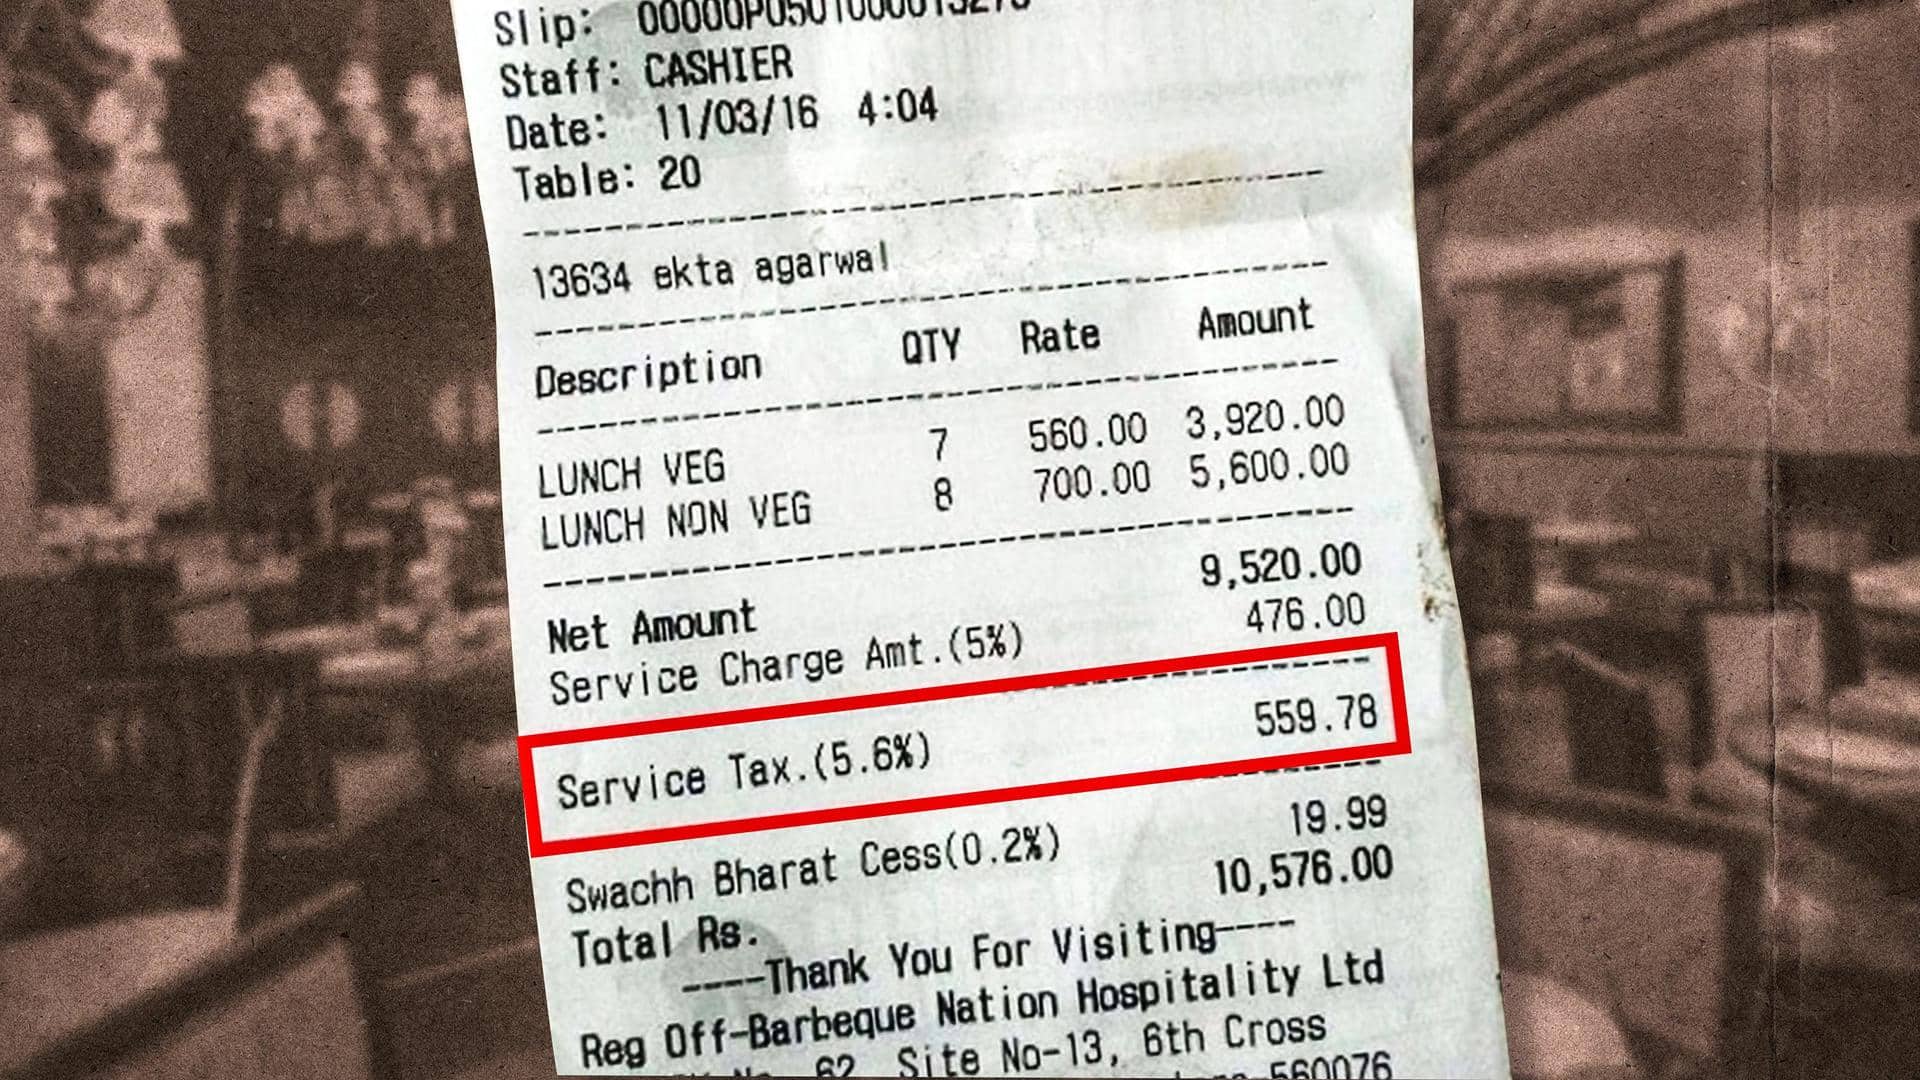 You can deny paying service charge at restaurants. Here's why